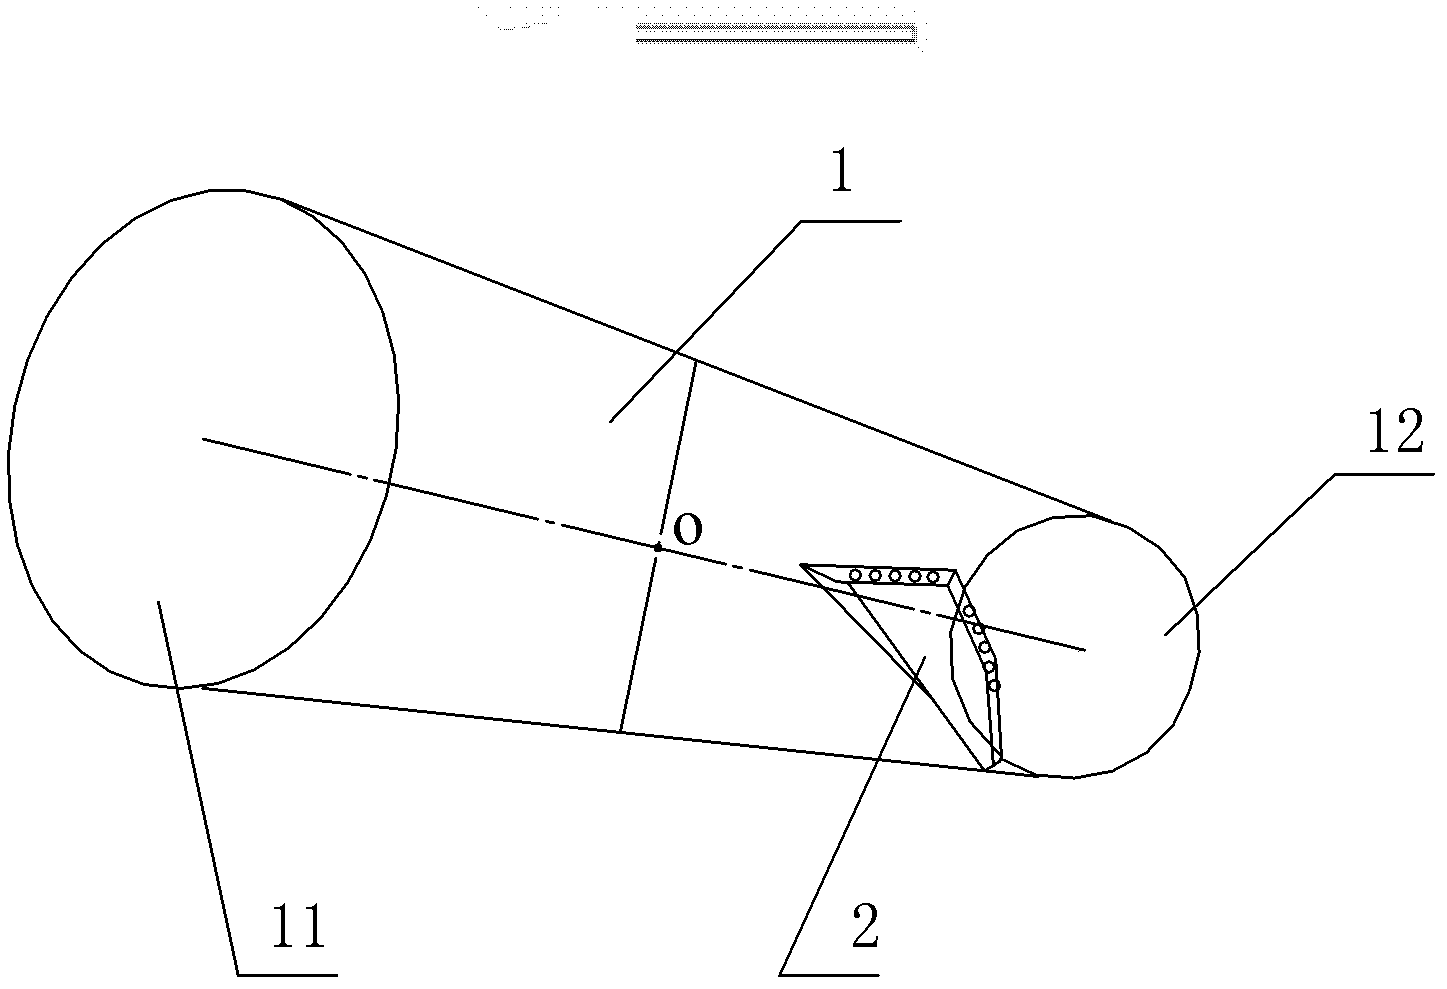 Design method of improved scram combustion chamber and its swirler